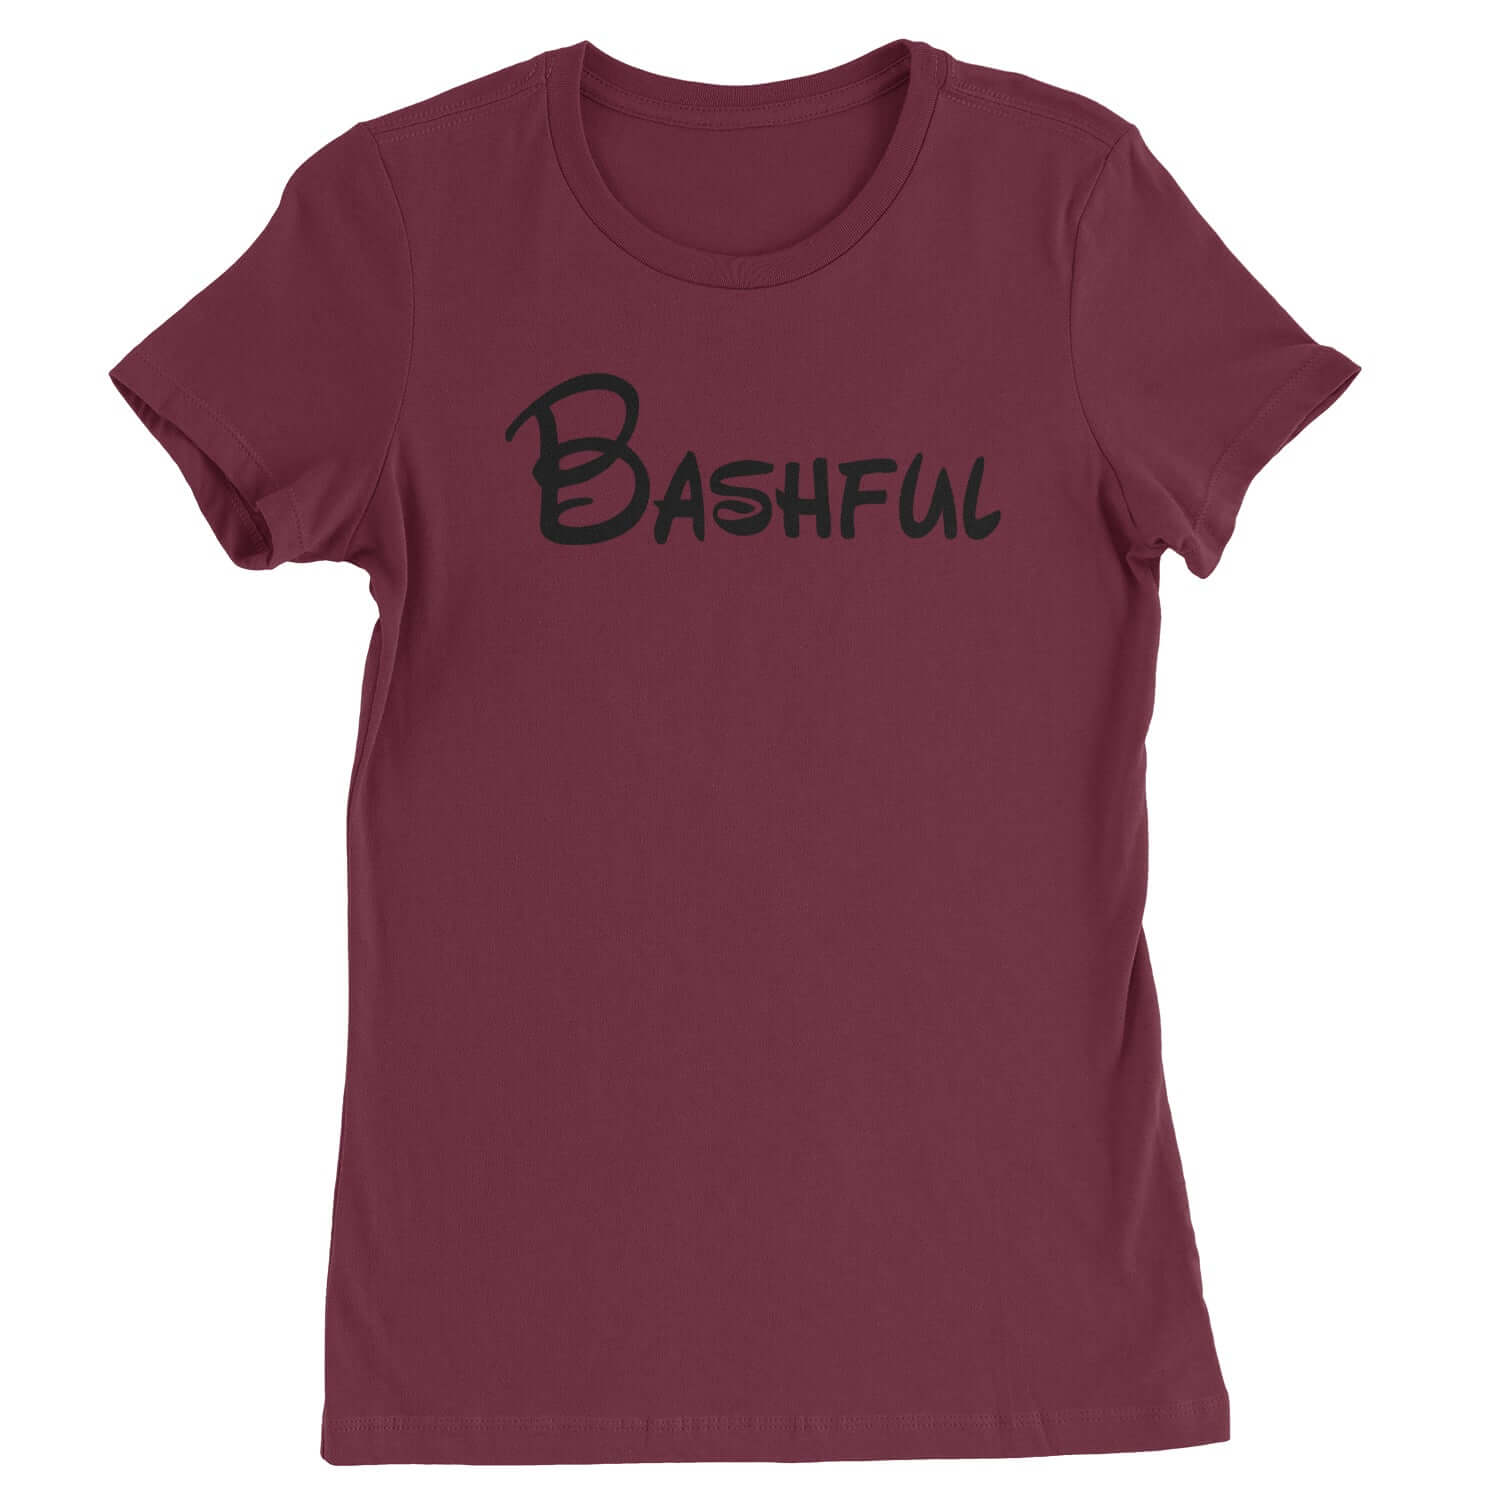 Bashful - 7 Dwarfs Costume Womens T-shirt and, costume, dwarfs, group, halloween, matching, seven, snow, the, white by Expression Tees